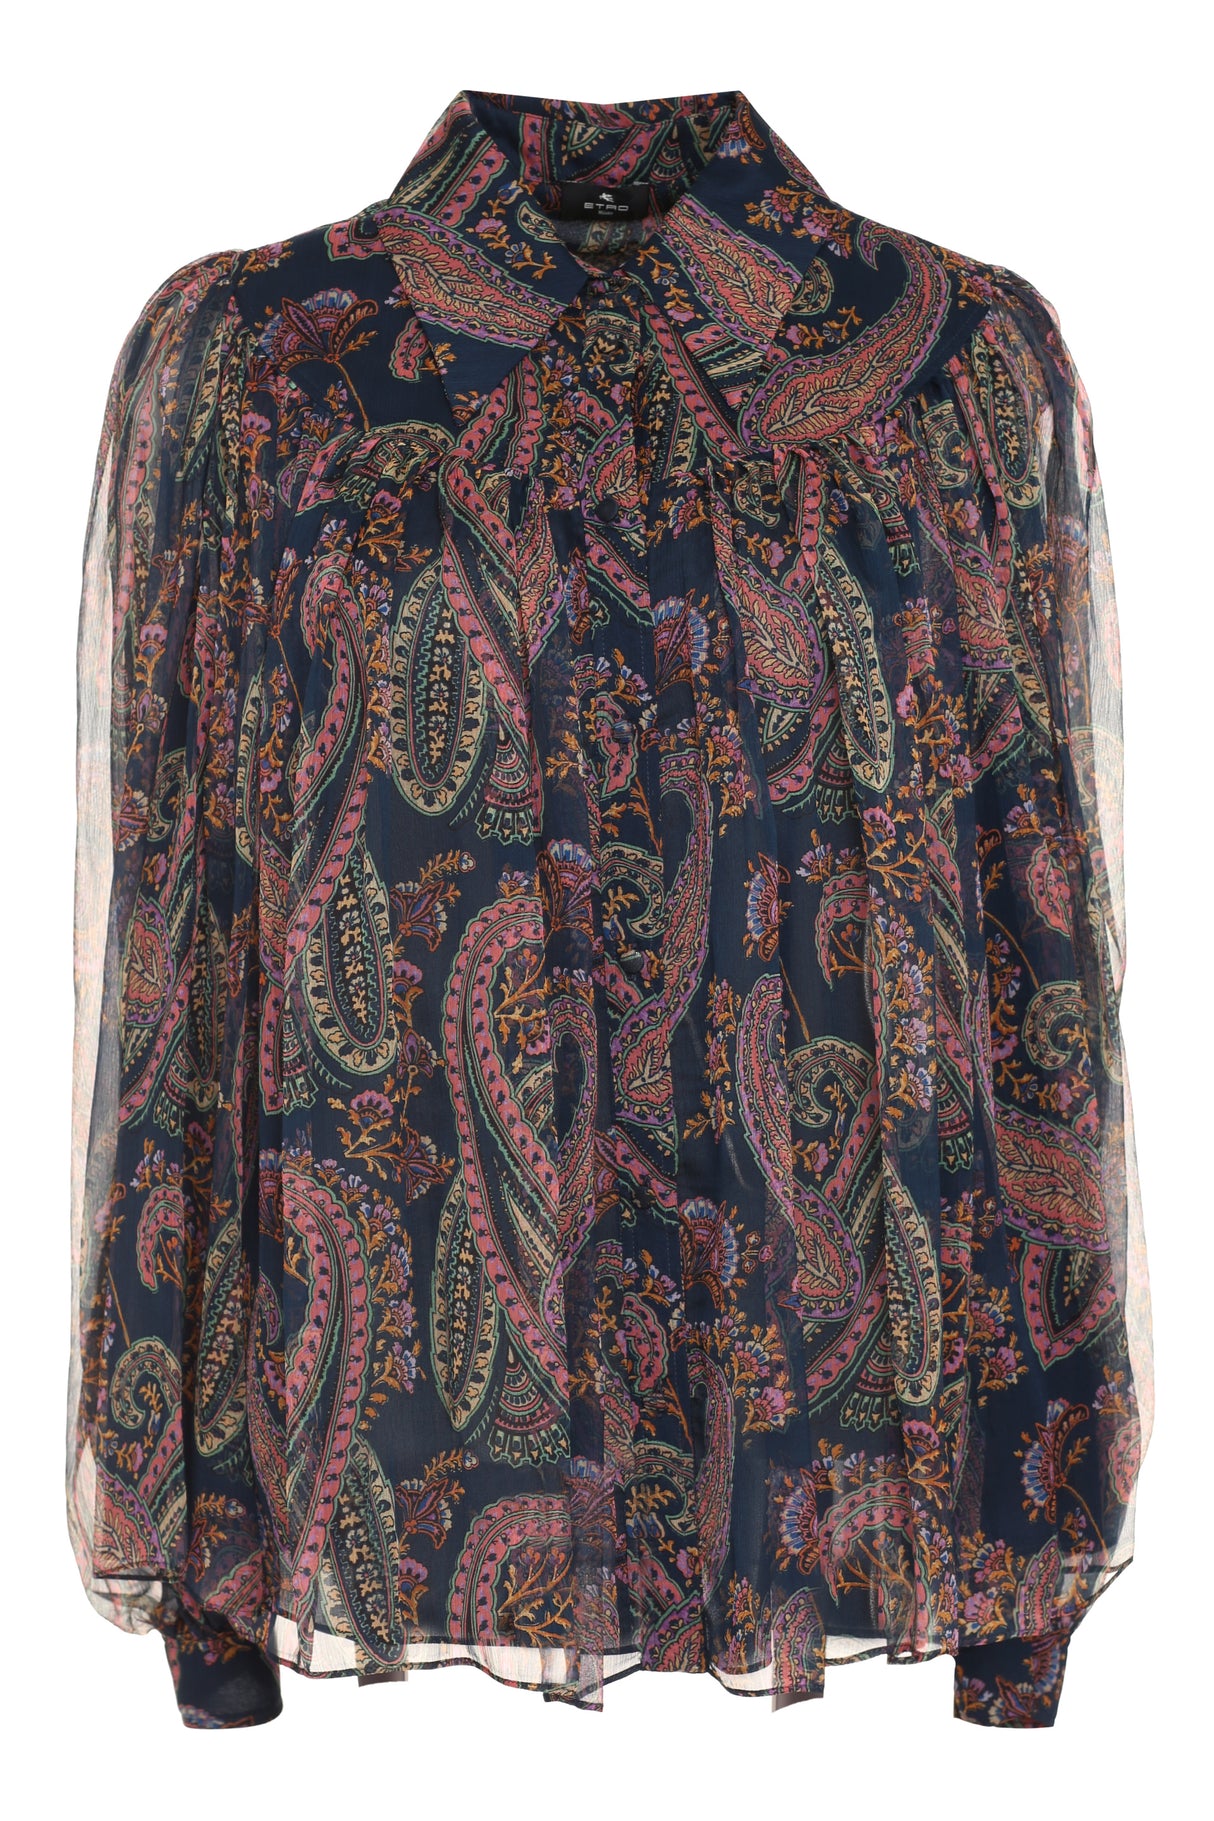 ETRO Luxurious Blue Silky Women's Blouse with Classic Collar and Elegant Paisley Pattern - FW23 Edition